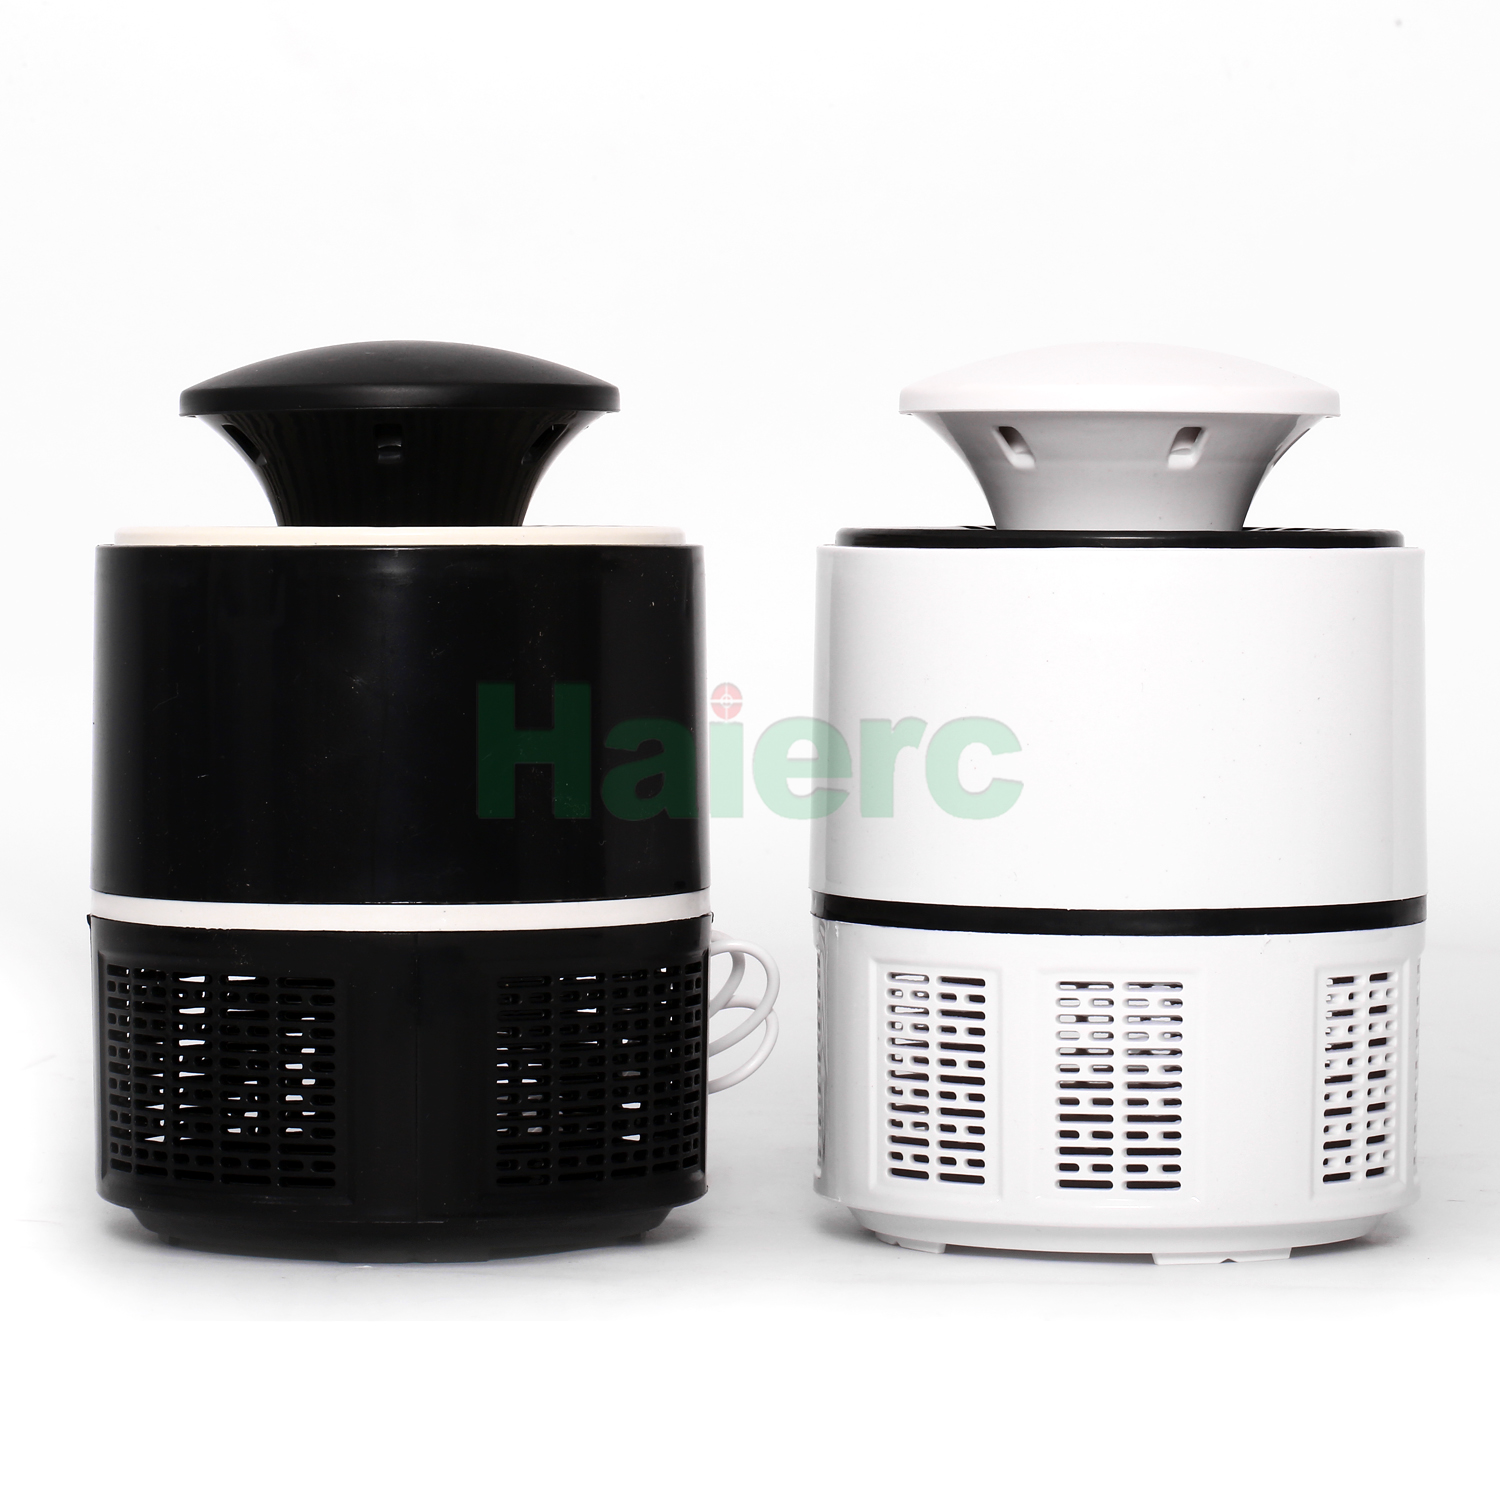 Haierc Pest Control LED Light Insect Mosquito Repellent Mosquito Killer Lamp